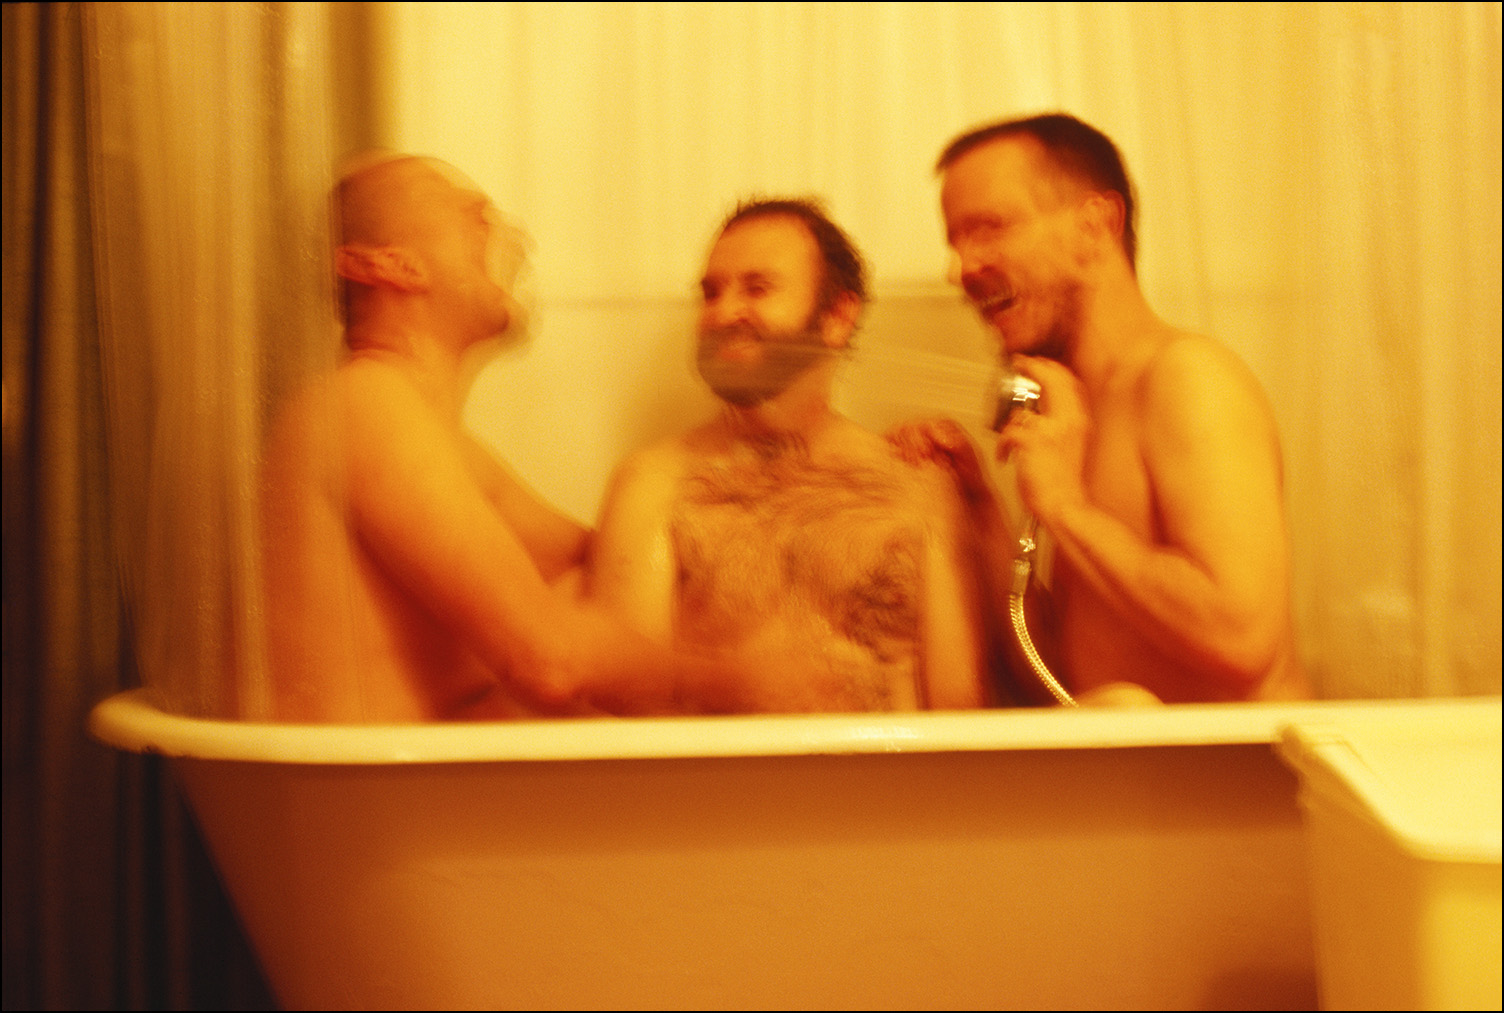   Three Men in the Sigma Clubhouse Tub, 2000  